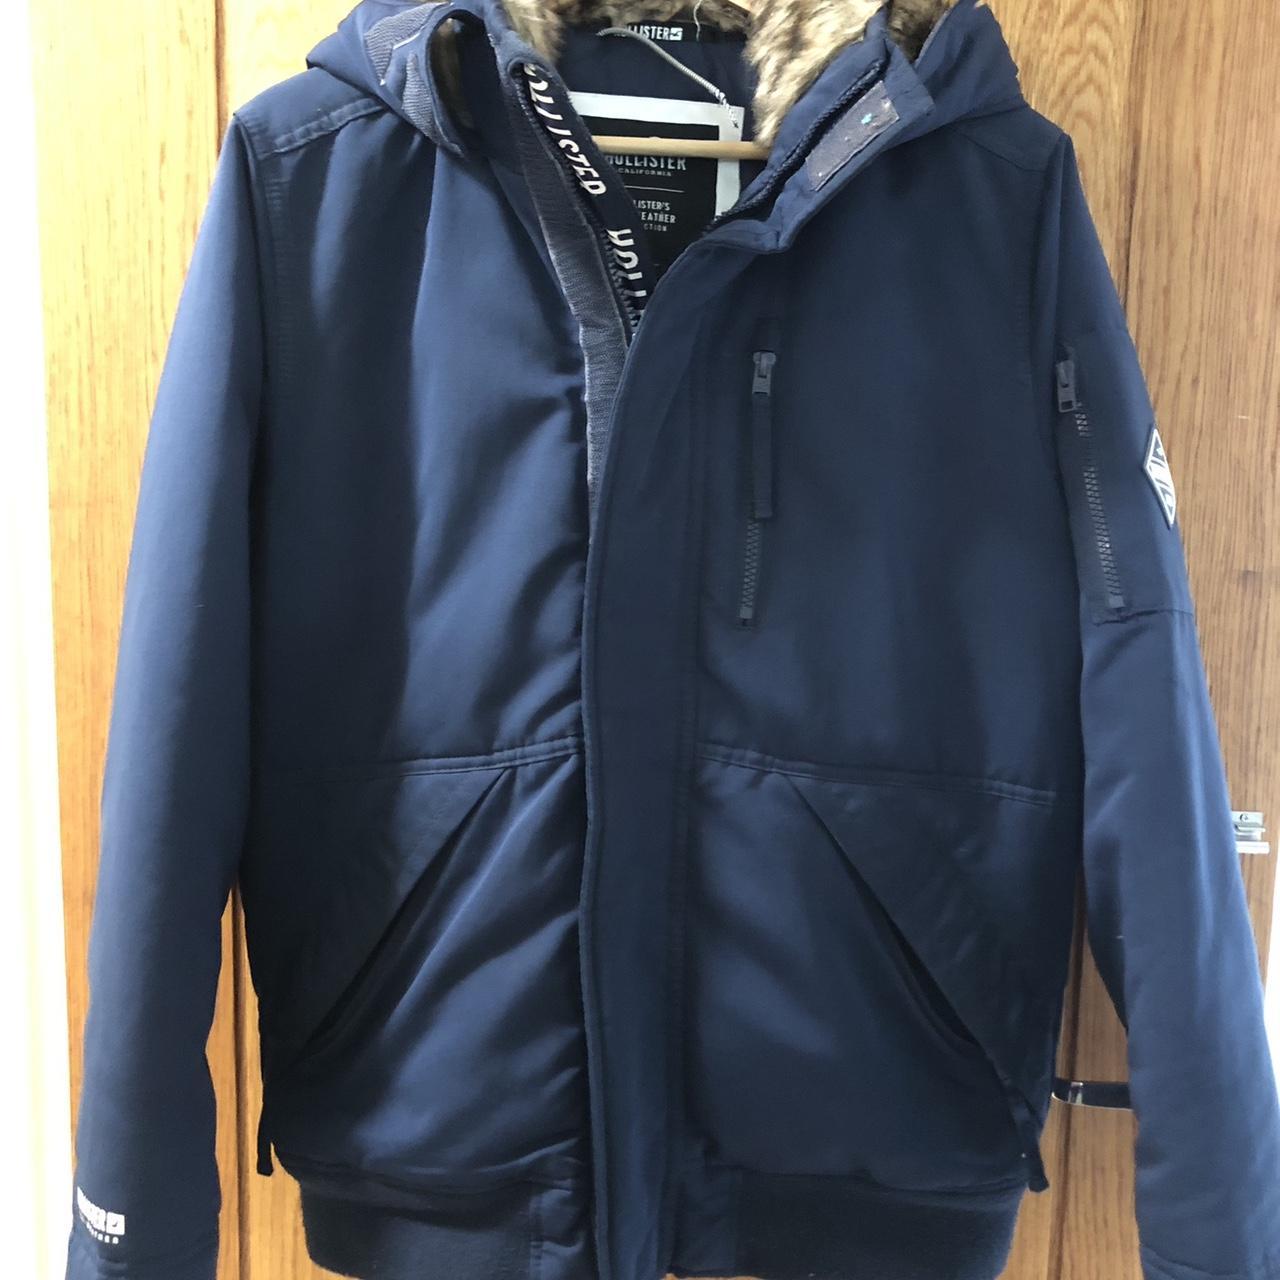 Hollister all-weather hooded jacket Zippered down - Depop